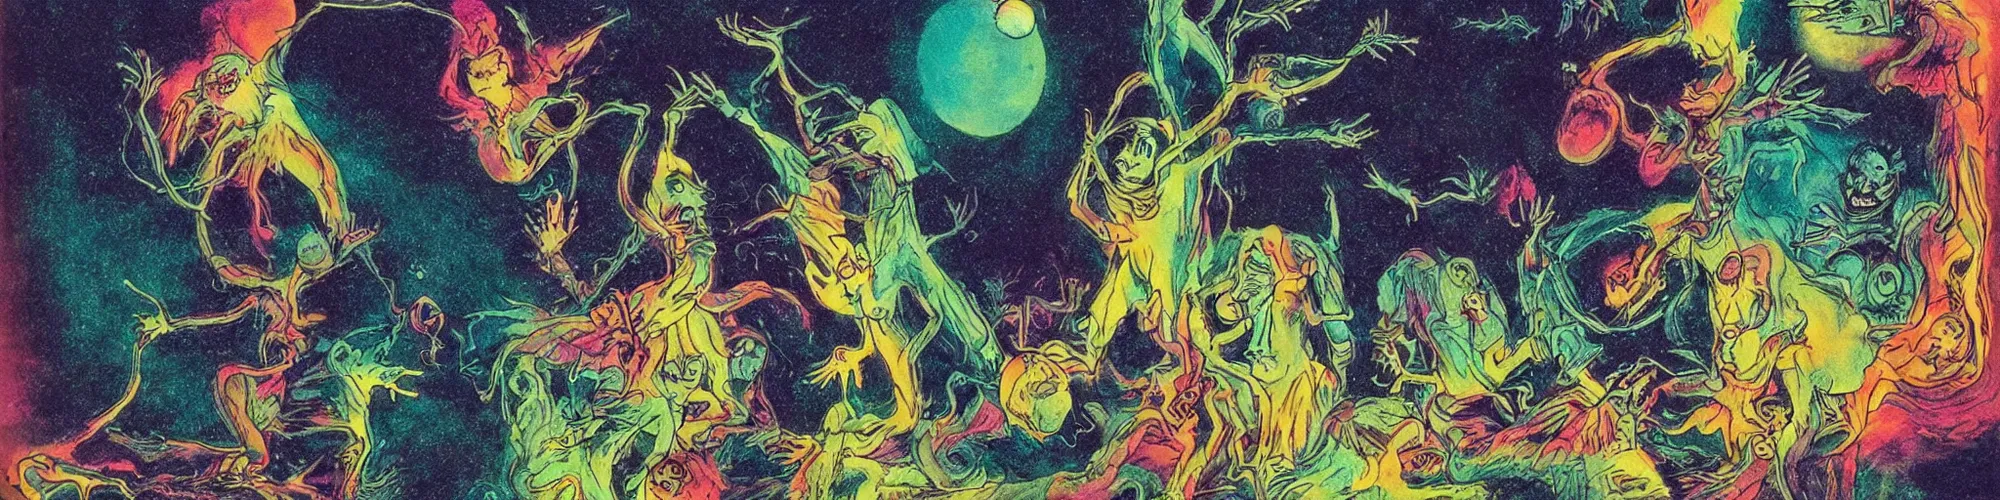 Prompt: dawn of creation ; first atom ; beings of light and darkness ; ethereal plane. bright neon colors. illustrated by maurice sendak and stephen gammell and junji ito and dr seuss